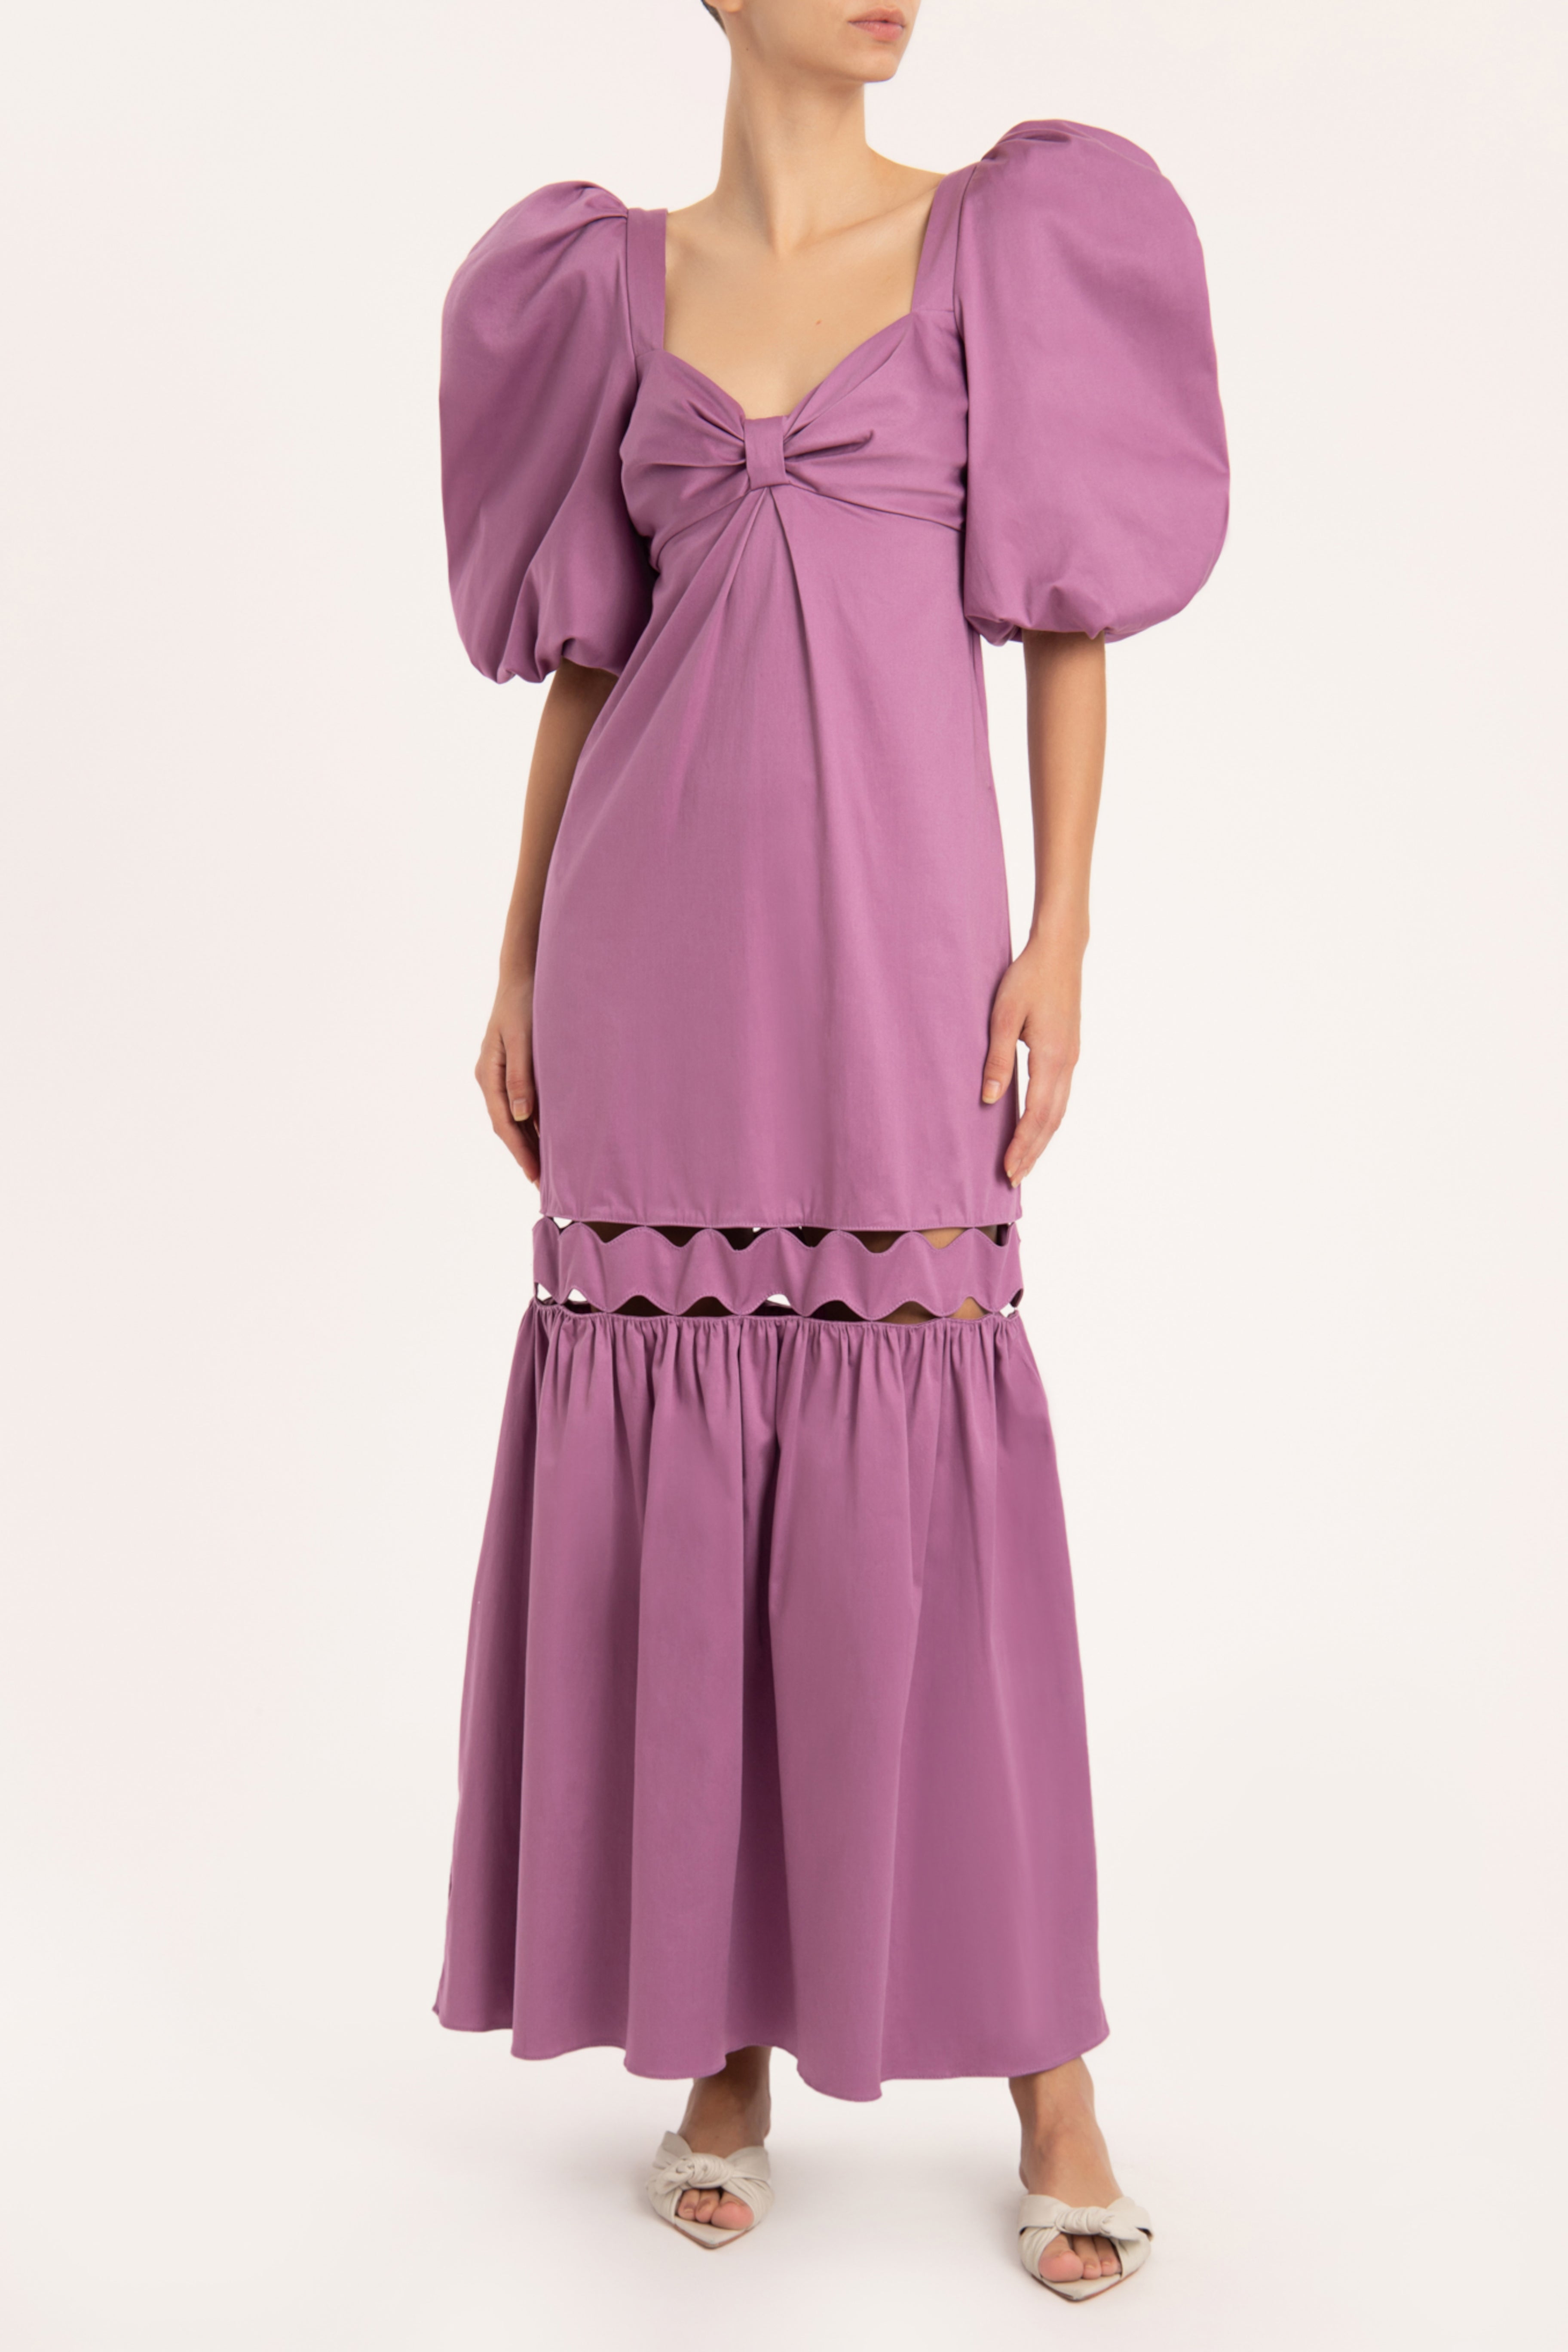 Moves Lilac Puff-Sleeved Long Dress Front